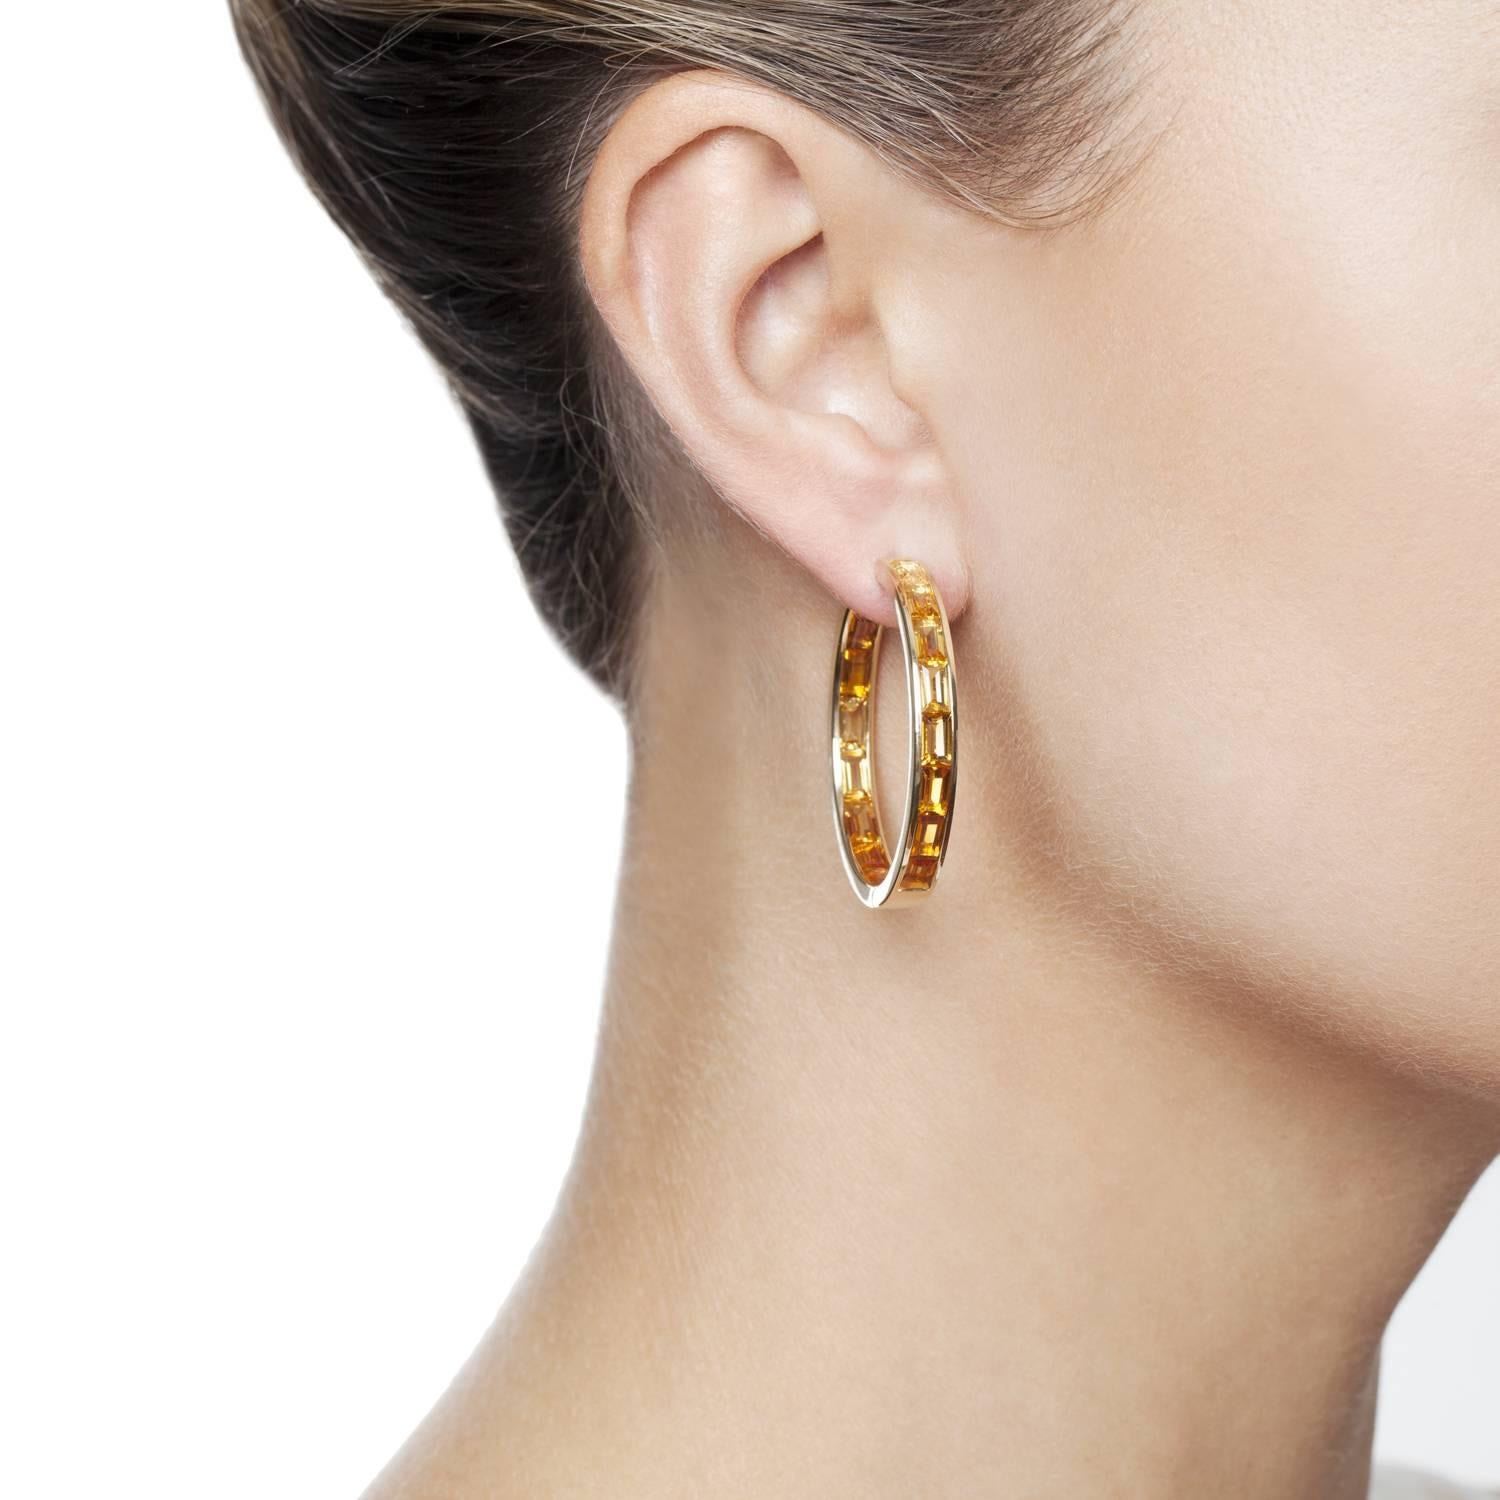 Gold graduated baguette gemstones in the Daou hoop earring is heightened by the perfect setting to allow light to refract through creating flashes of beautiful colour, glowing like a stained glass window. The fine setting extends to the back of the